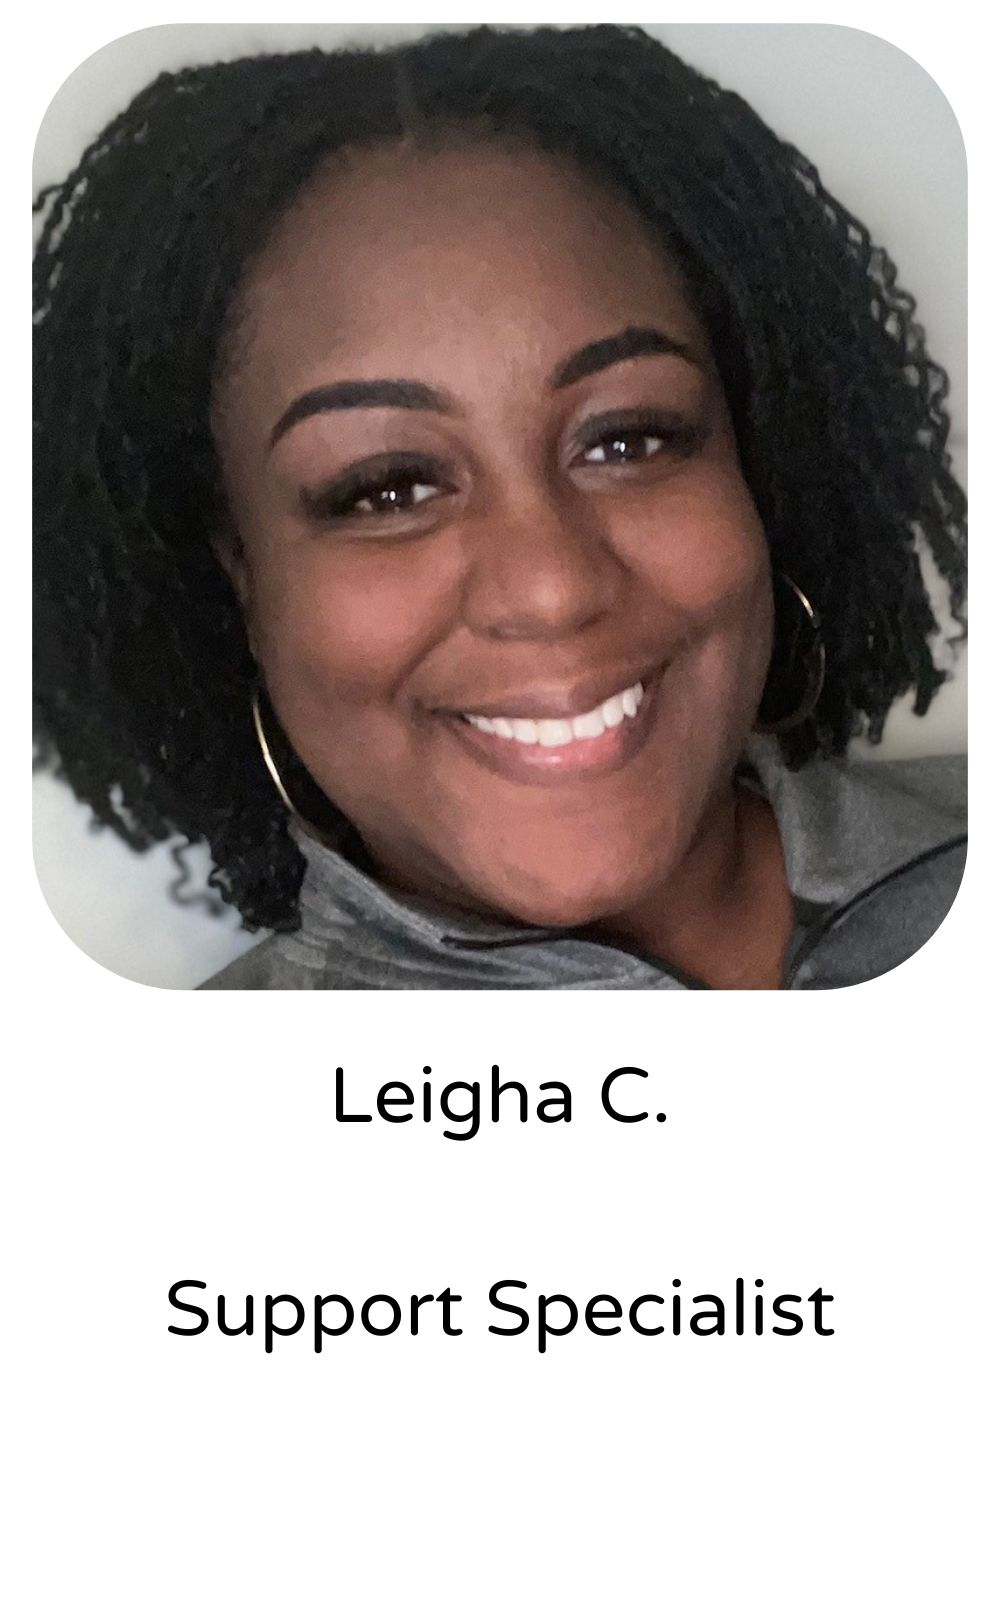 Leigha C, Support Specialist